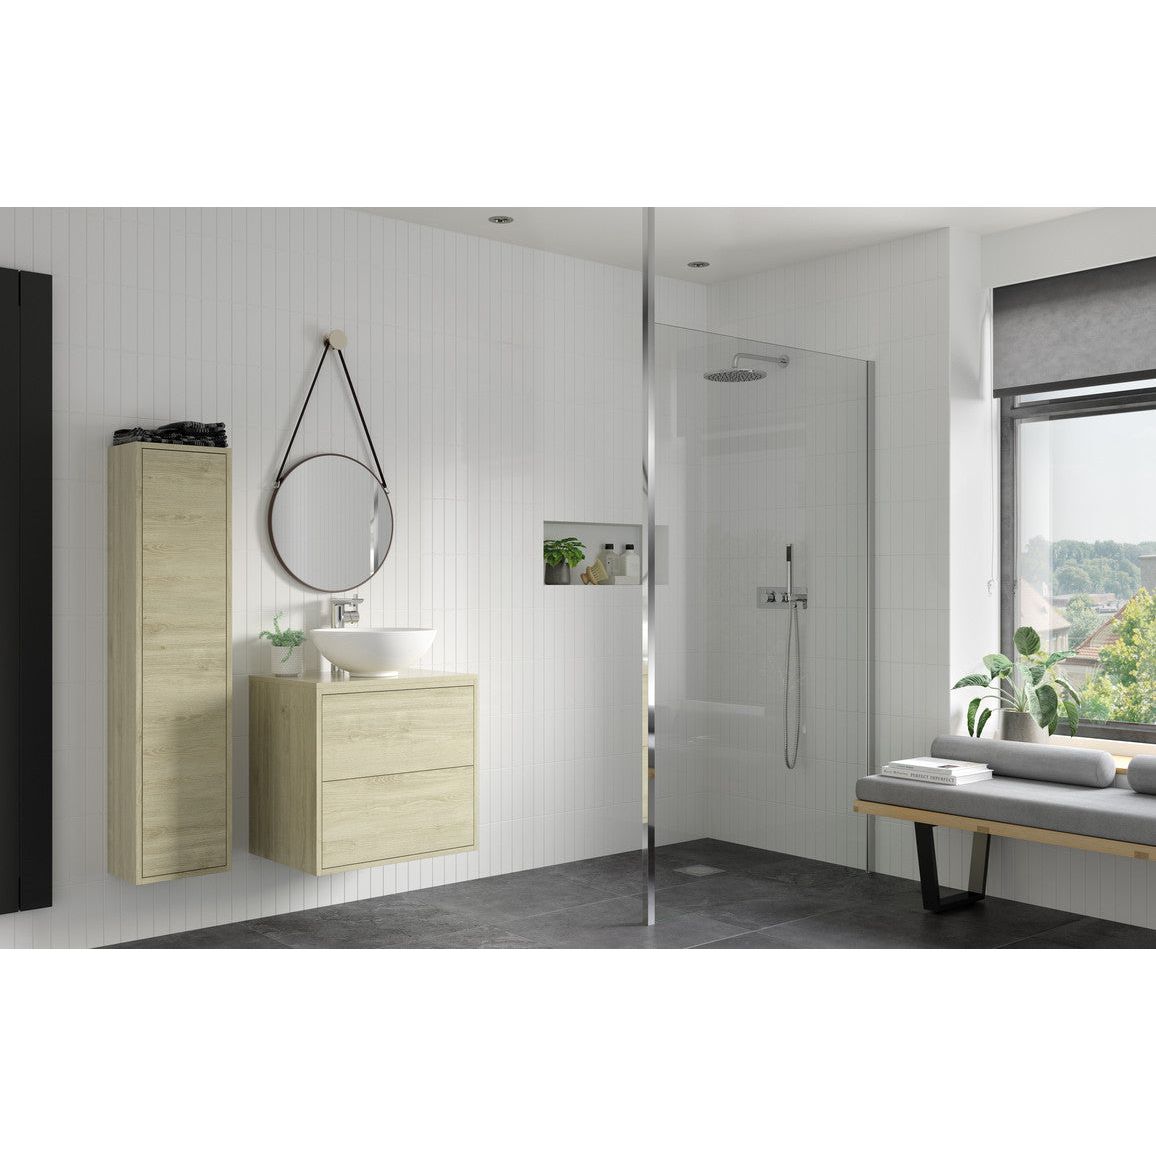 Montague 1200mm Wetroom Panel & Floor-to-Ceiling Pole - Chrome